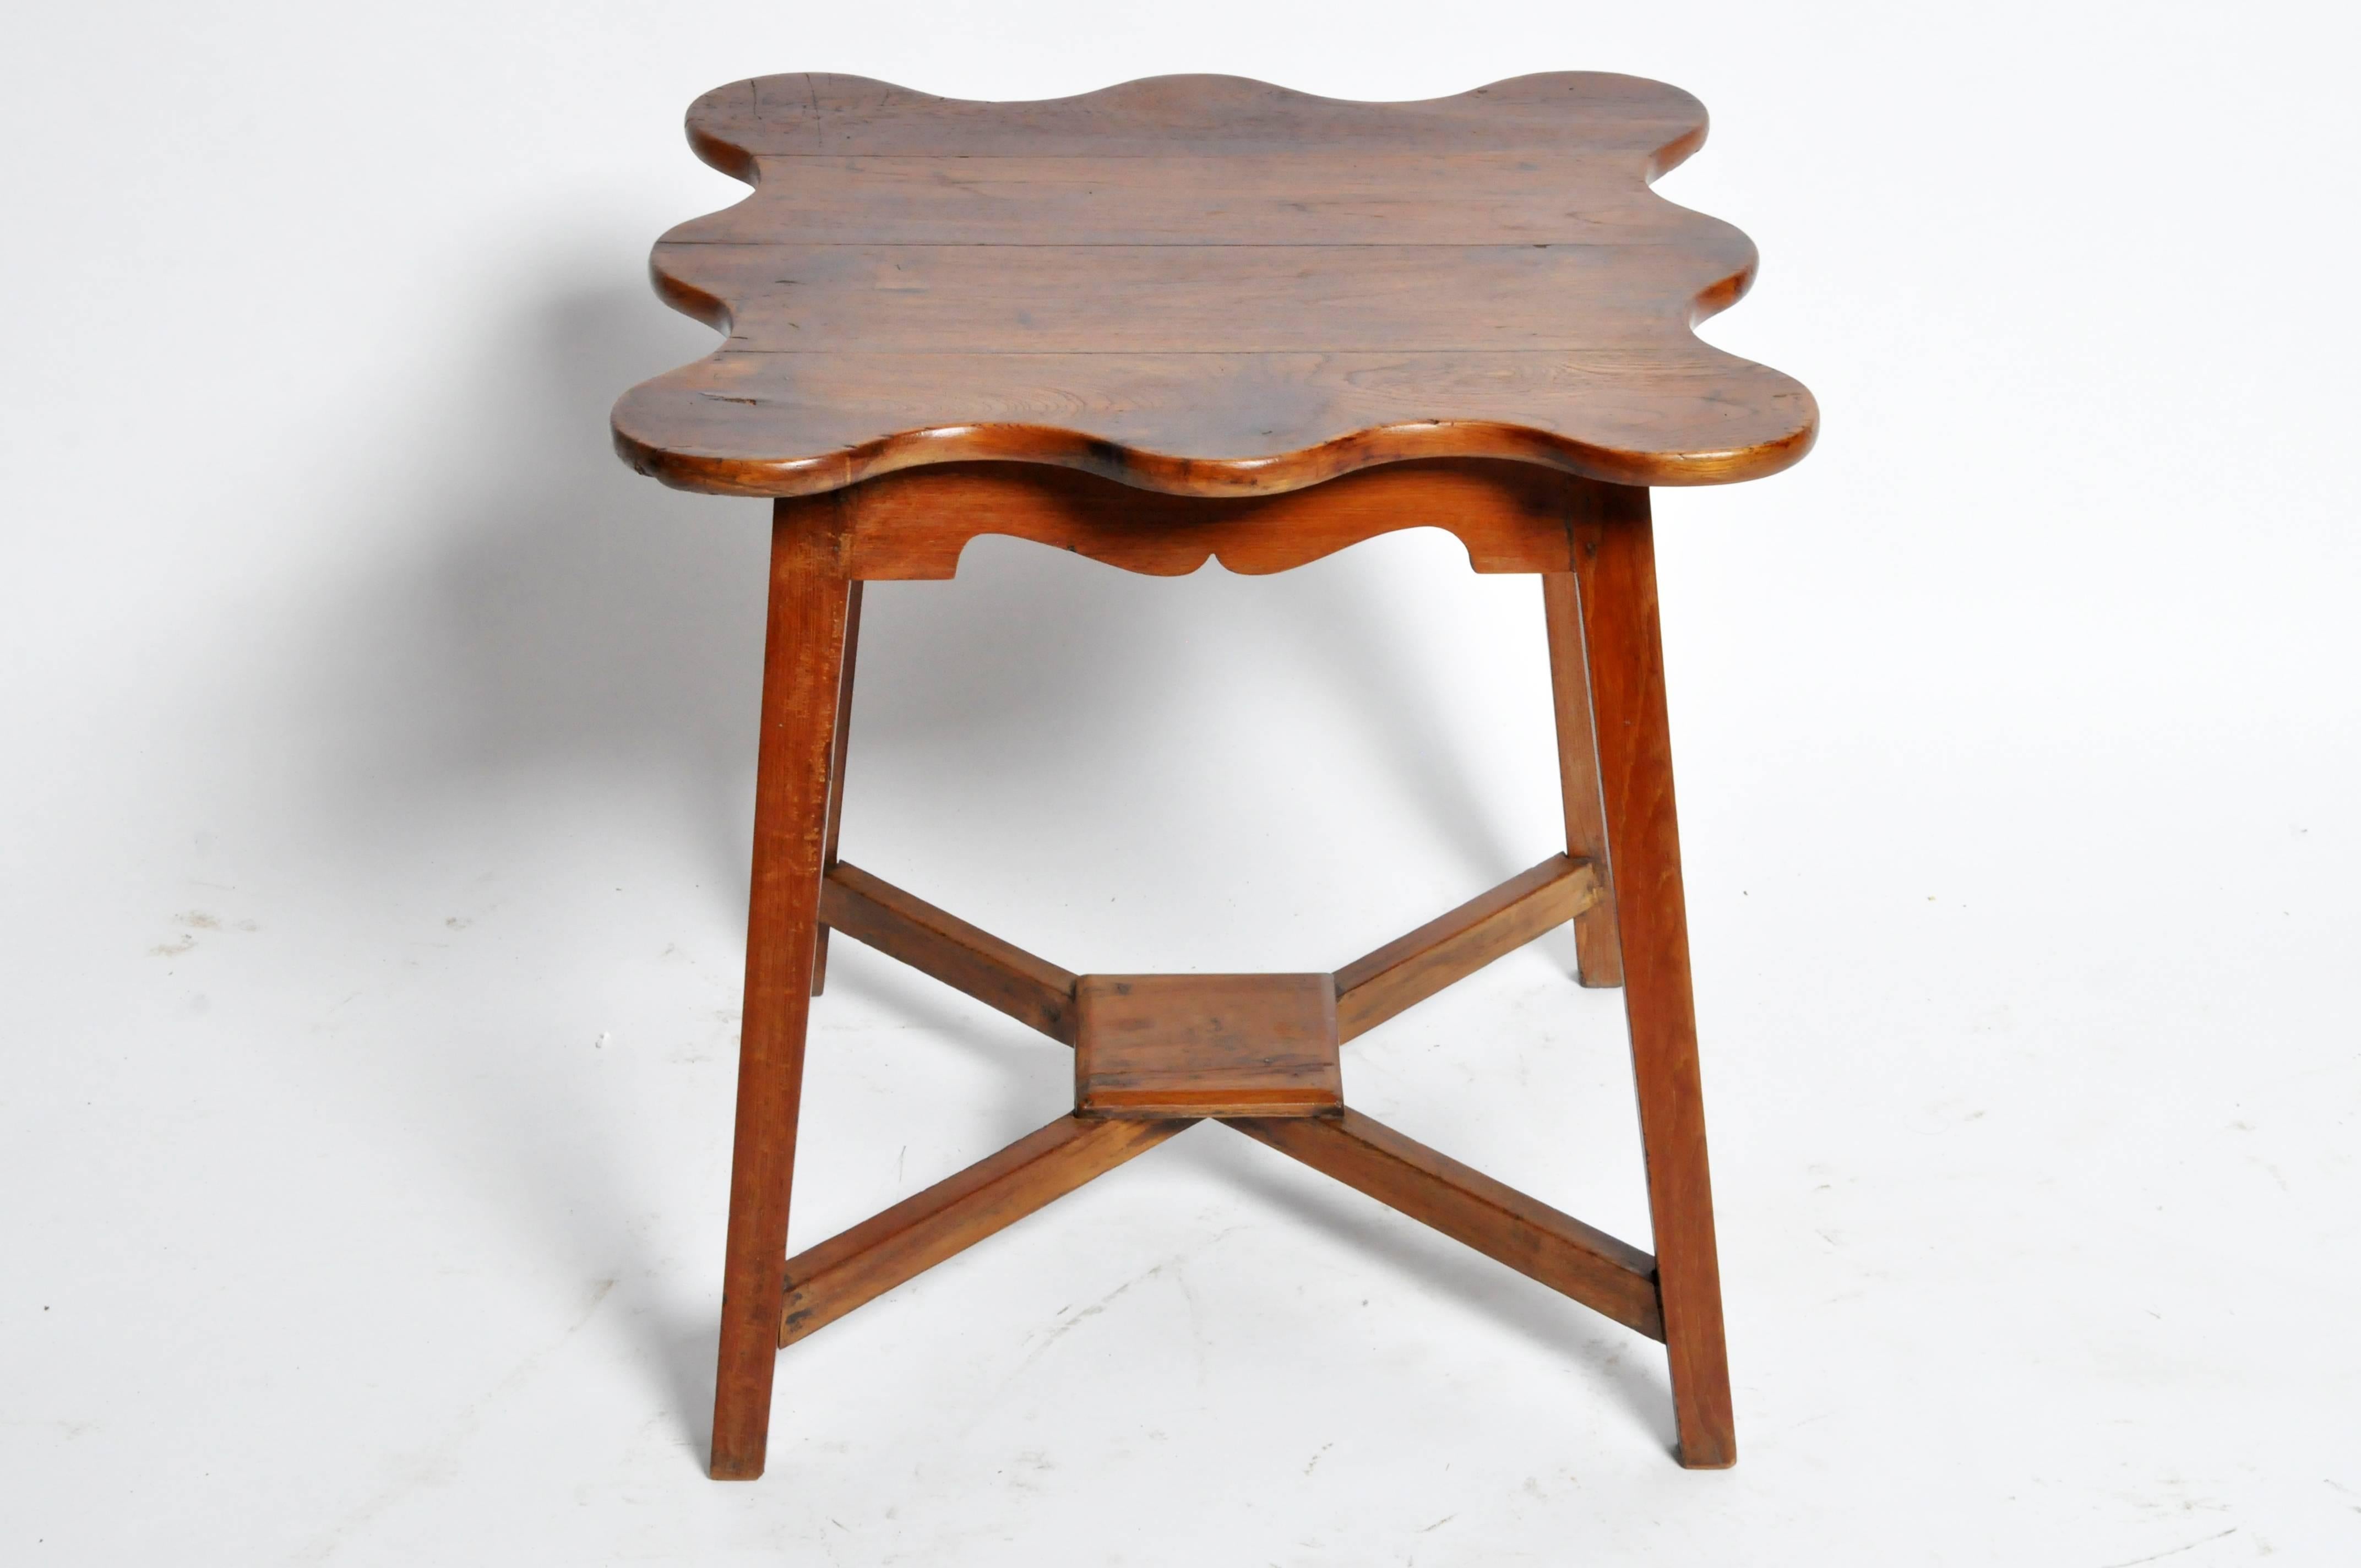 20th Century British Colonial Side Table with Four Legs